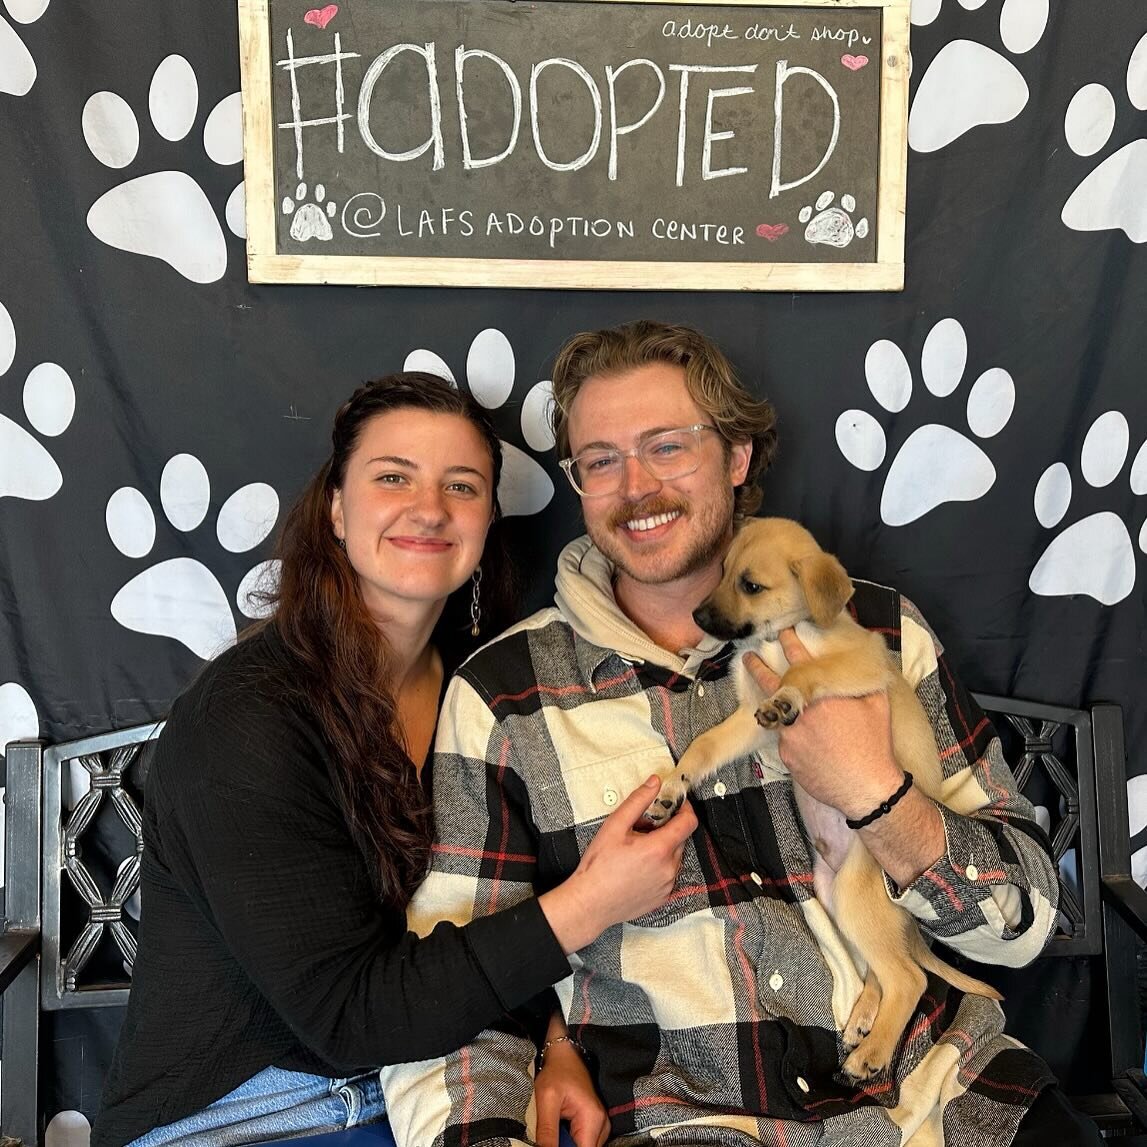 Tweety has been #adopted!